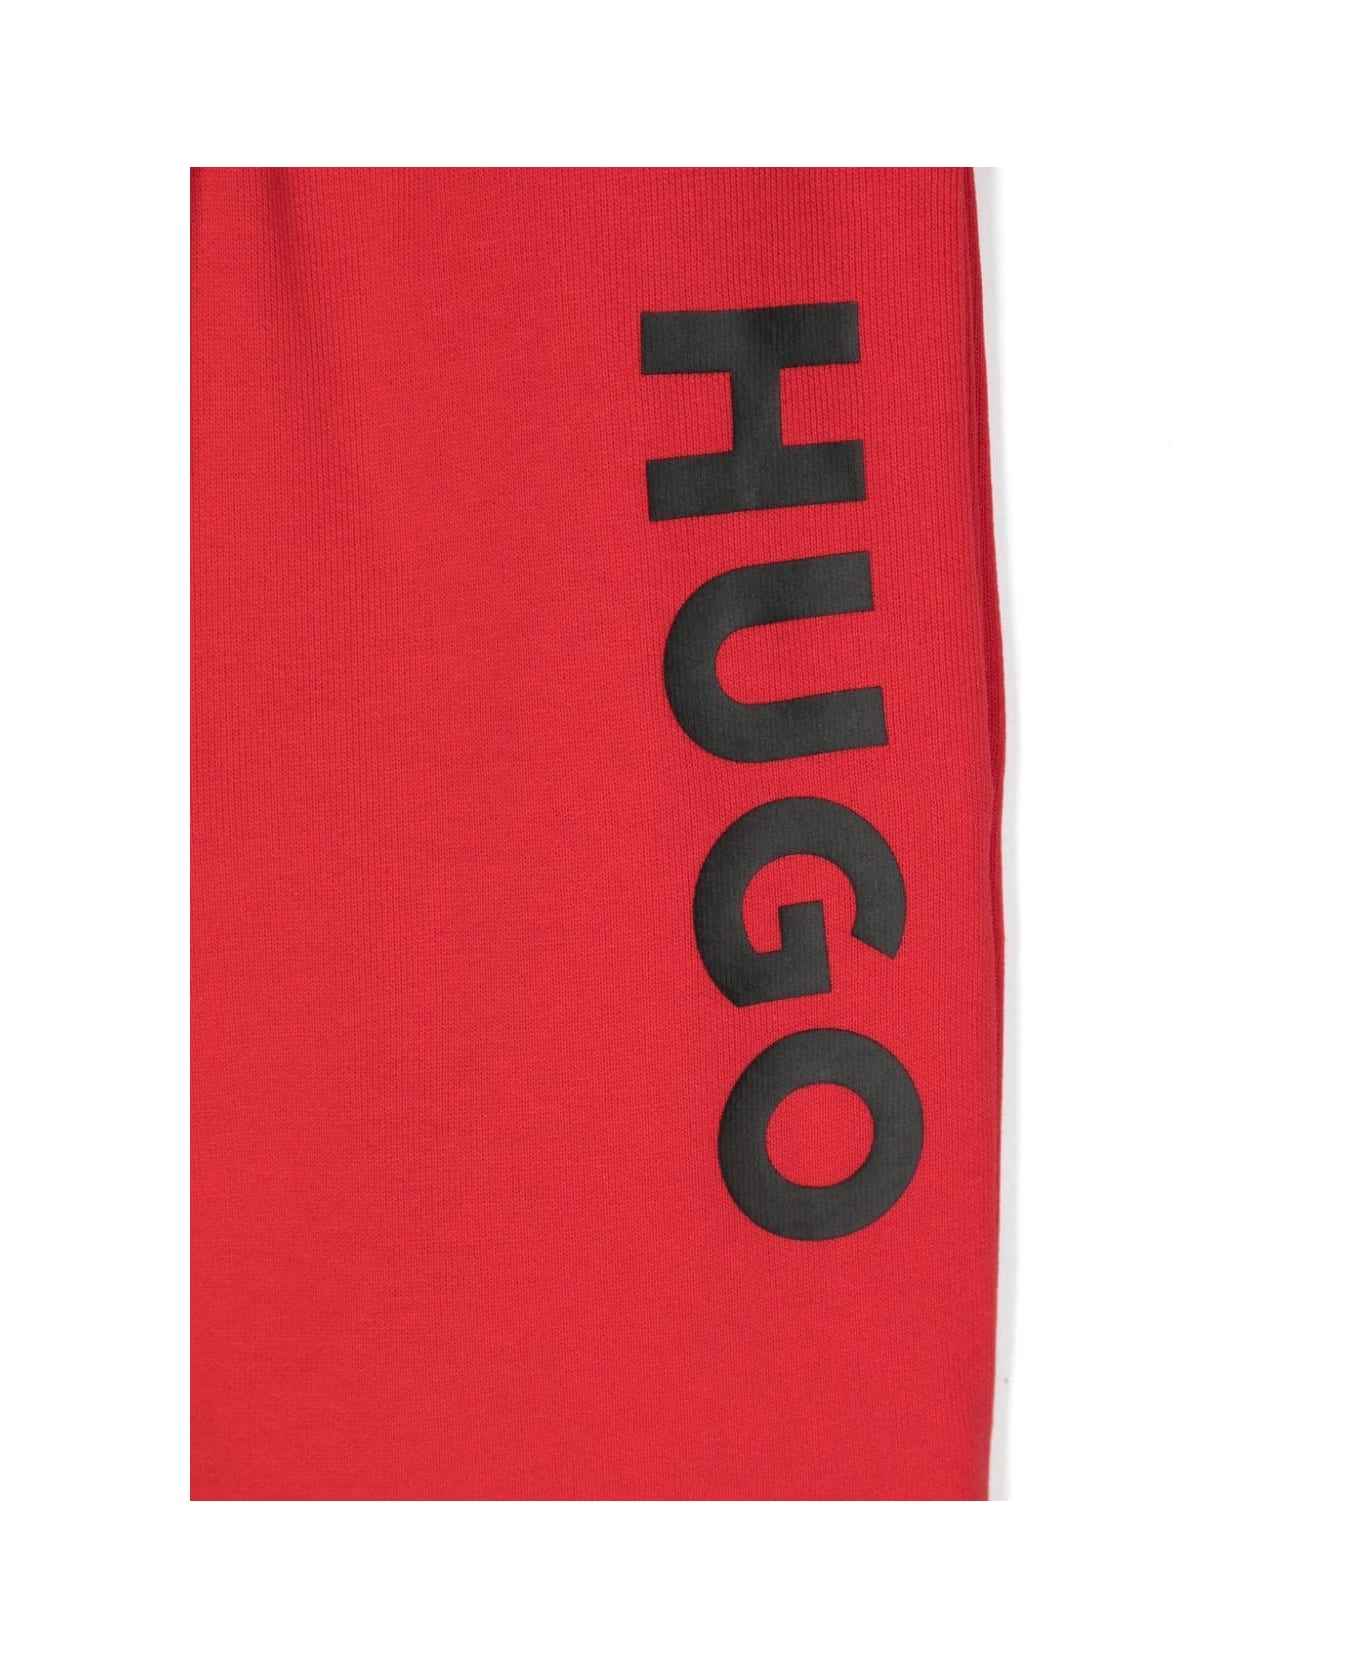 Hugo Boss Sports Shorts With Print - Red ボトムス